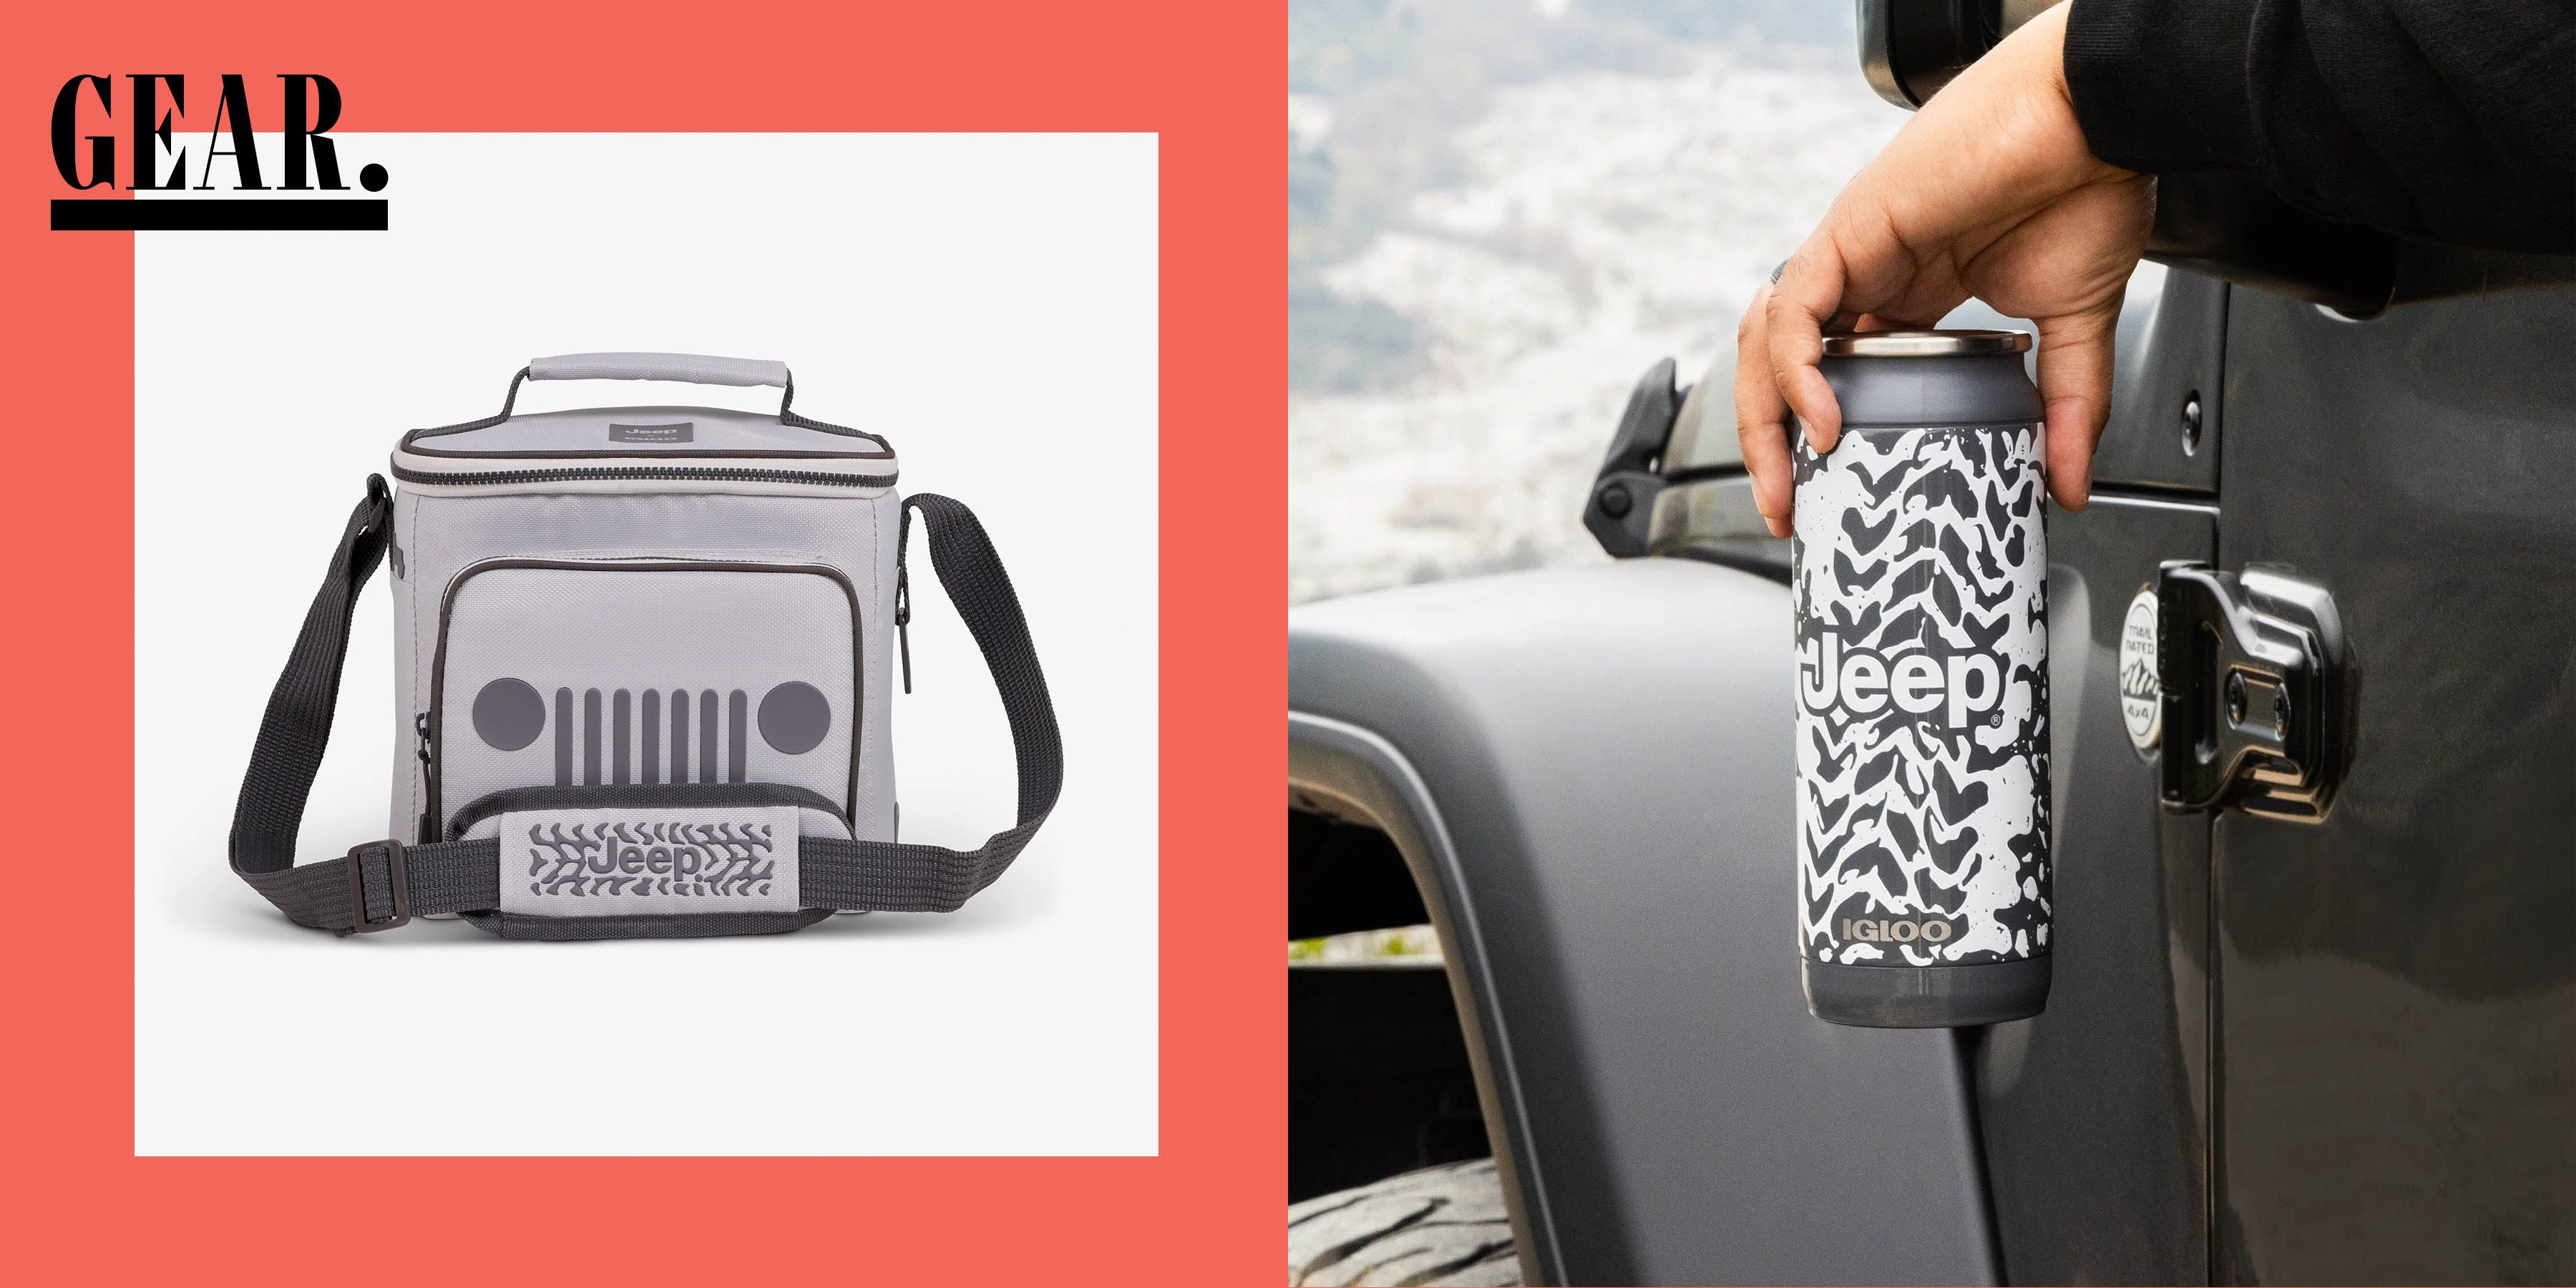 This New Jeep x Igloo Collab Has Us Dreaming of Wide-Open Spaces and Off-Road Adventures